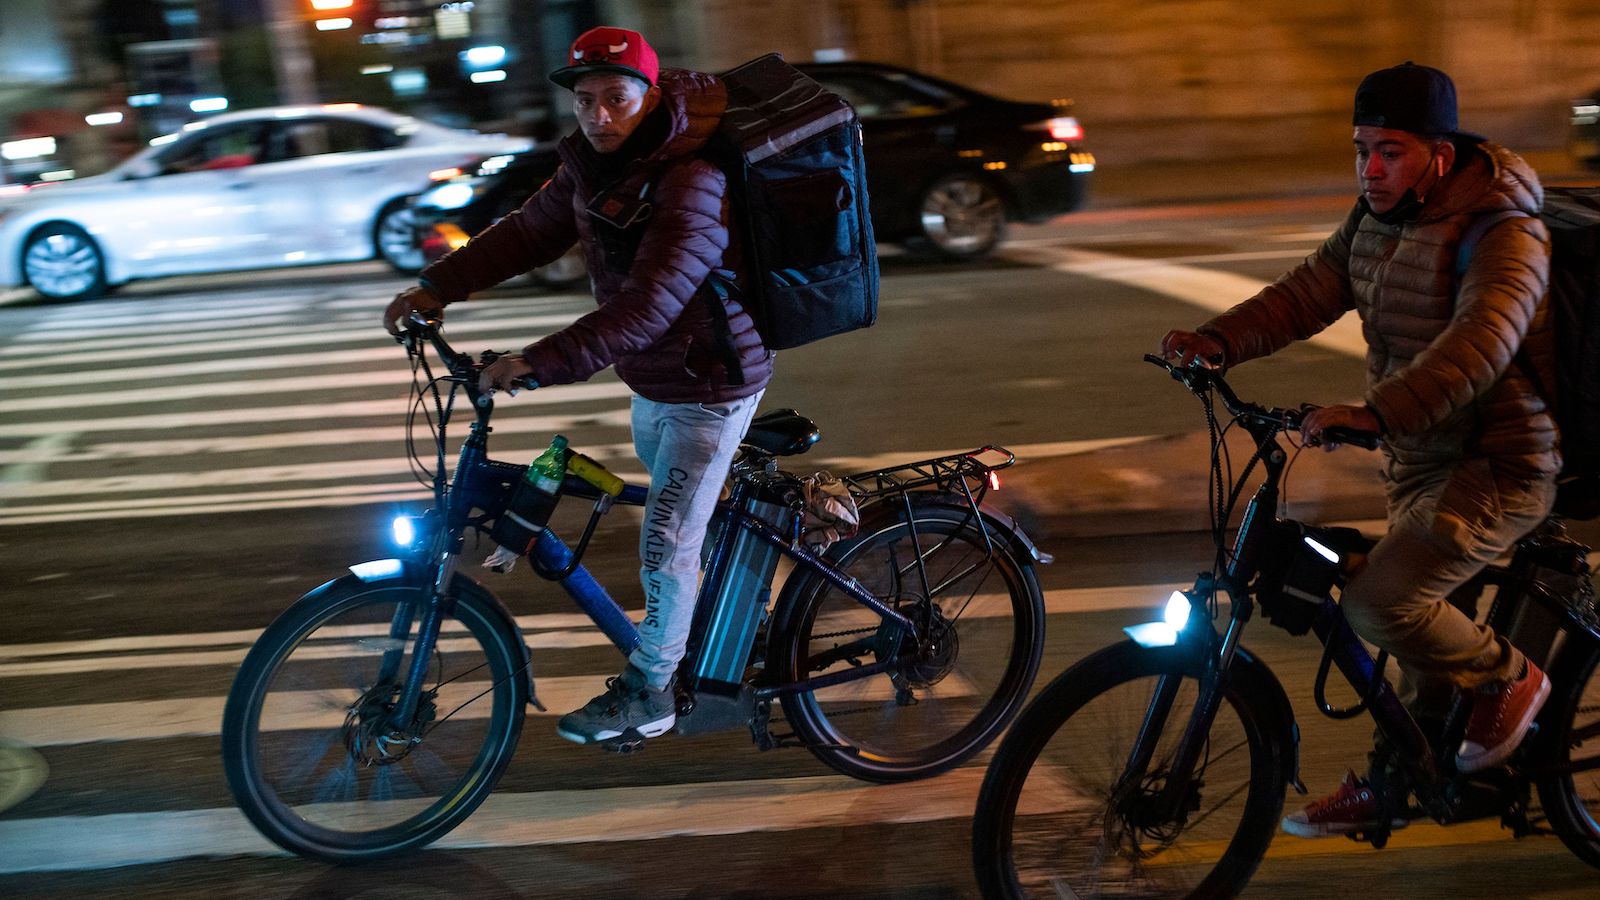 Delivery workers ride their bikes in the Manhattan borough of New York on October 27, 2021.